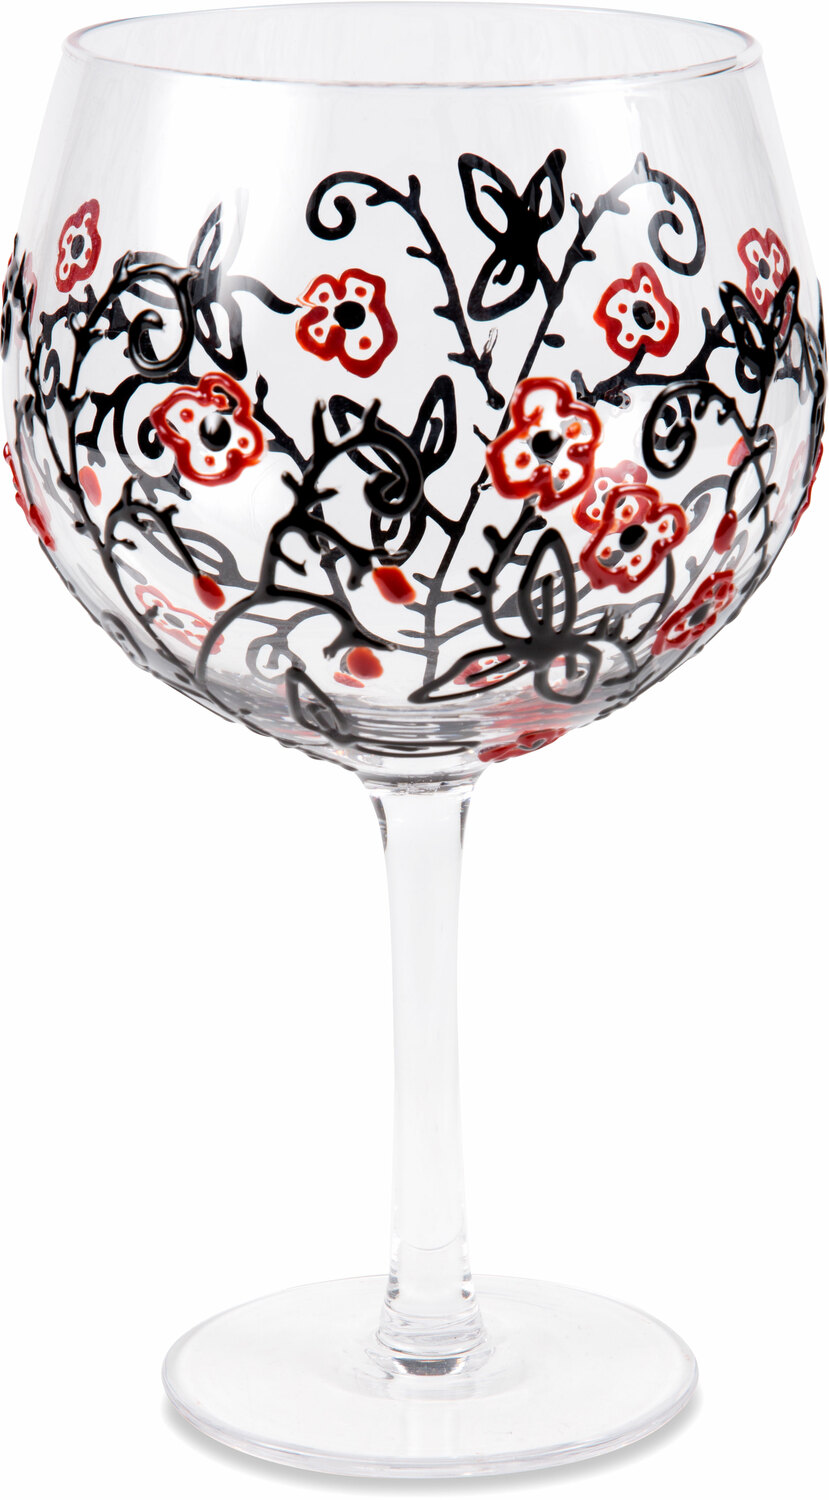 Red Flowers & Swirls by Sunny by Sue - Red Flowers & Swirls - 24 oz Hand Decorated Glass